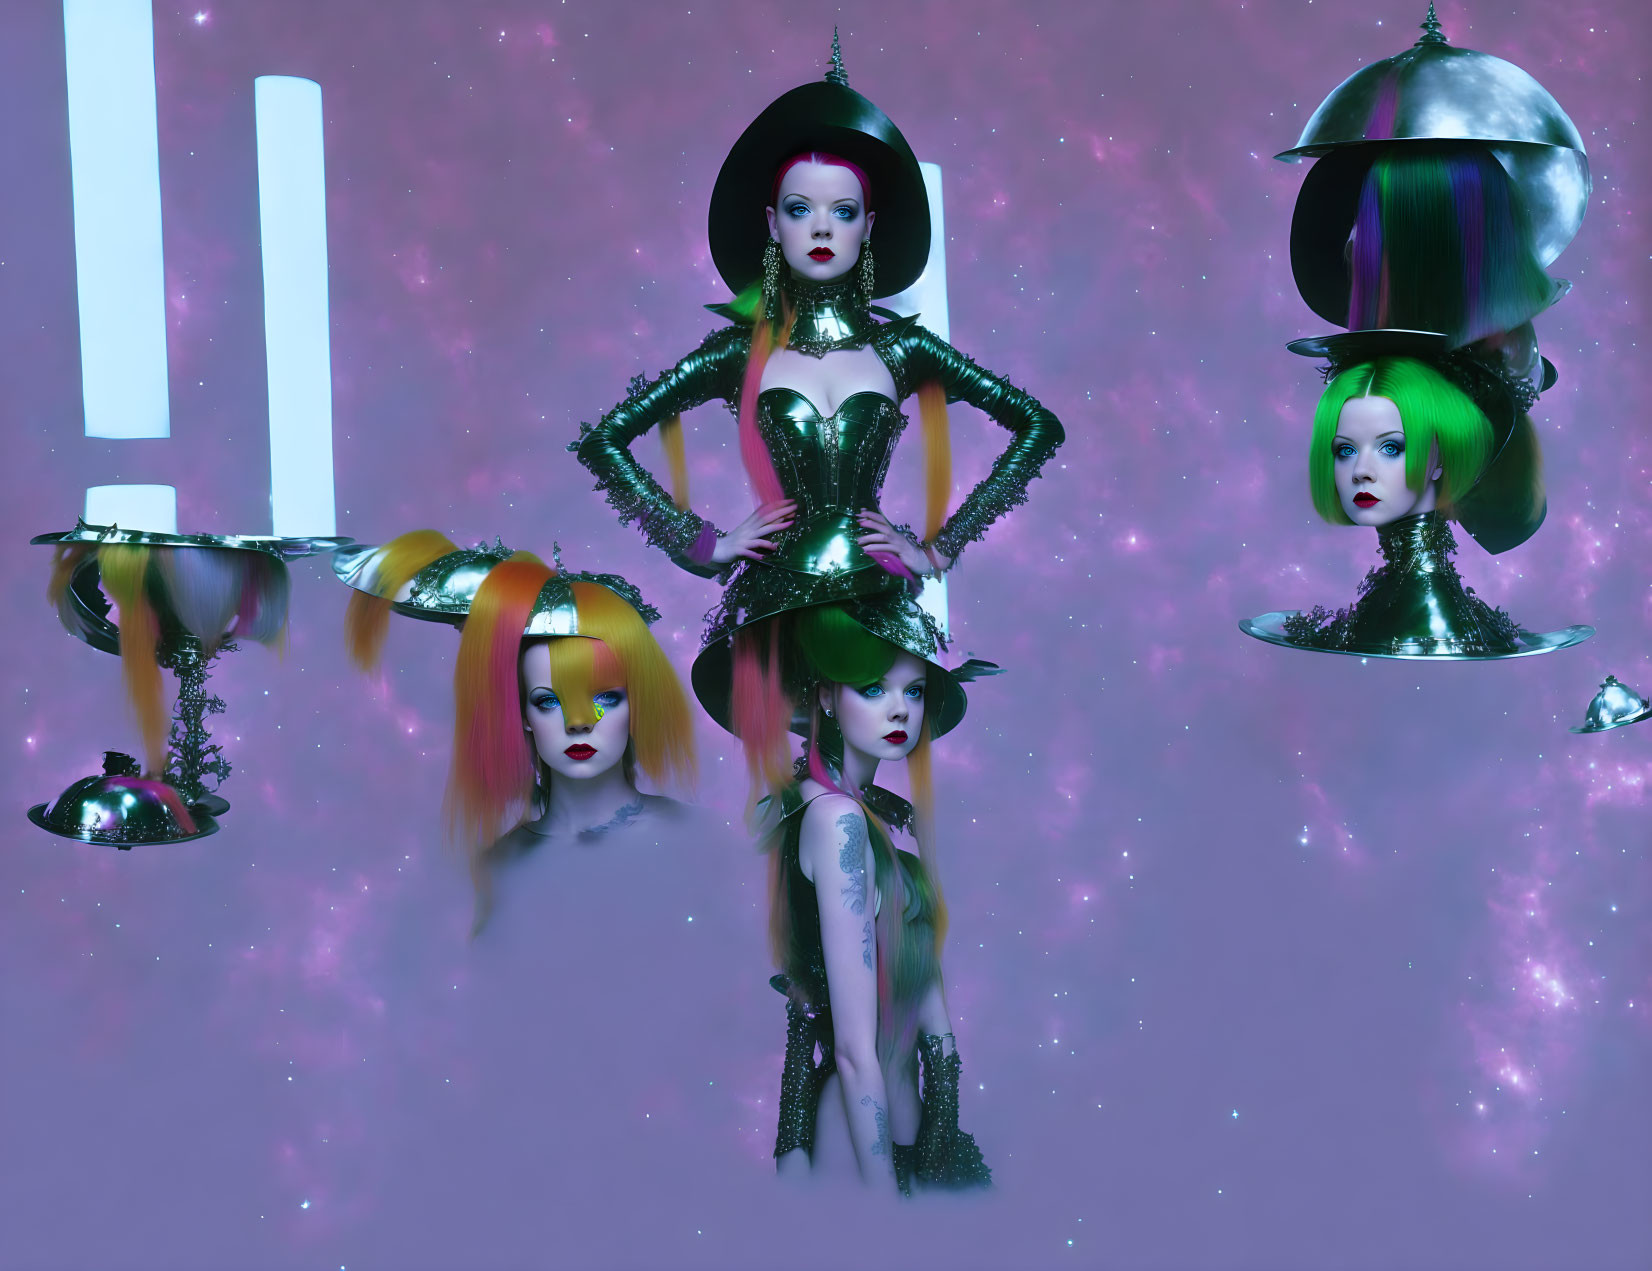 Four stylized female figures in gothic attire under UFO-like lights against a starry purple background